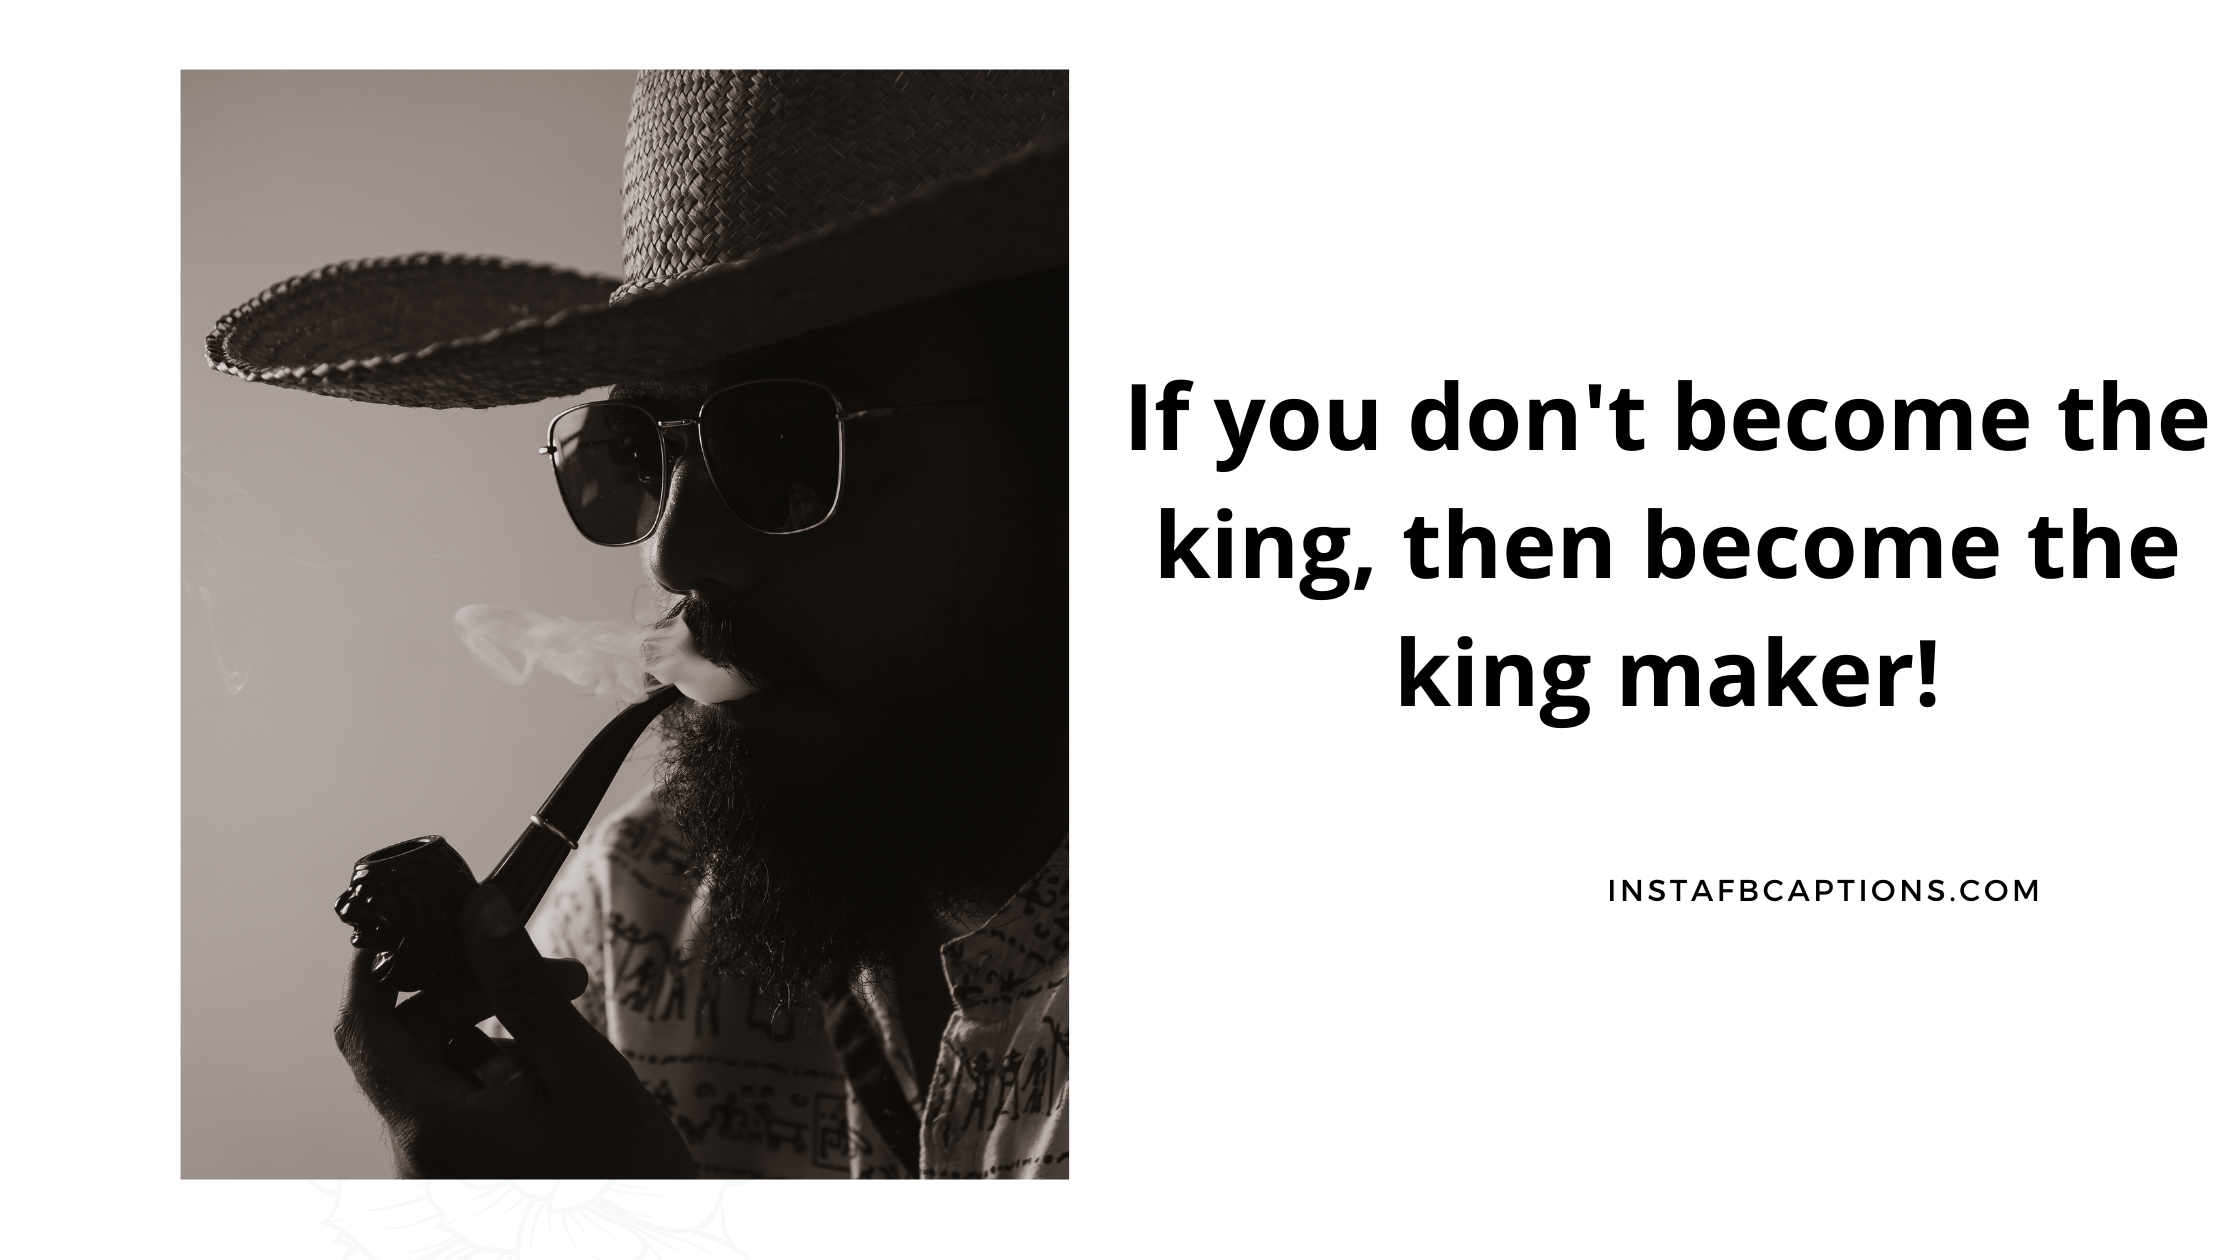 If you don't become the king, then become the kingmaker! king captions for instagram - Top Kingmaker Captions For Instagram Selfies - 95+ King Captions For Instagram Posts in 2022